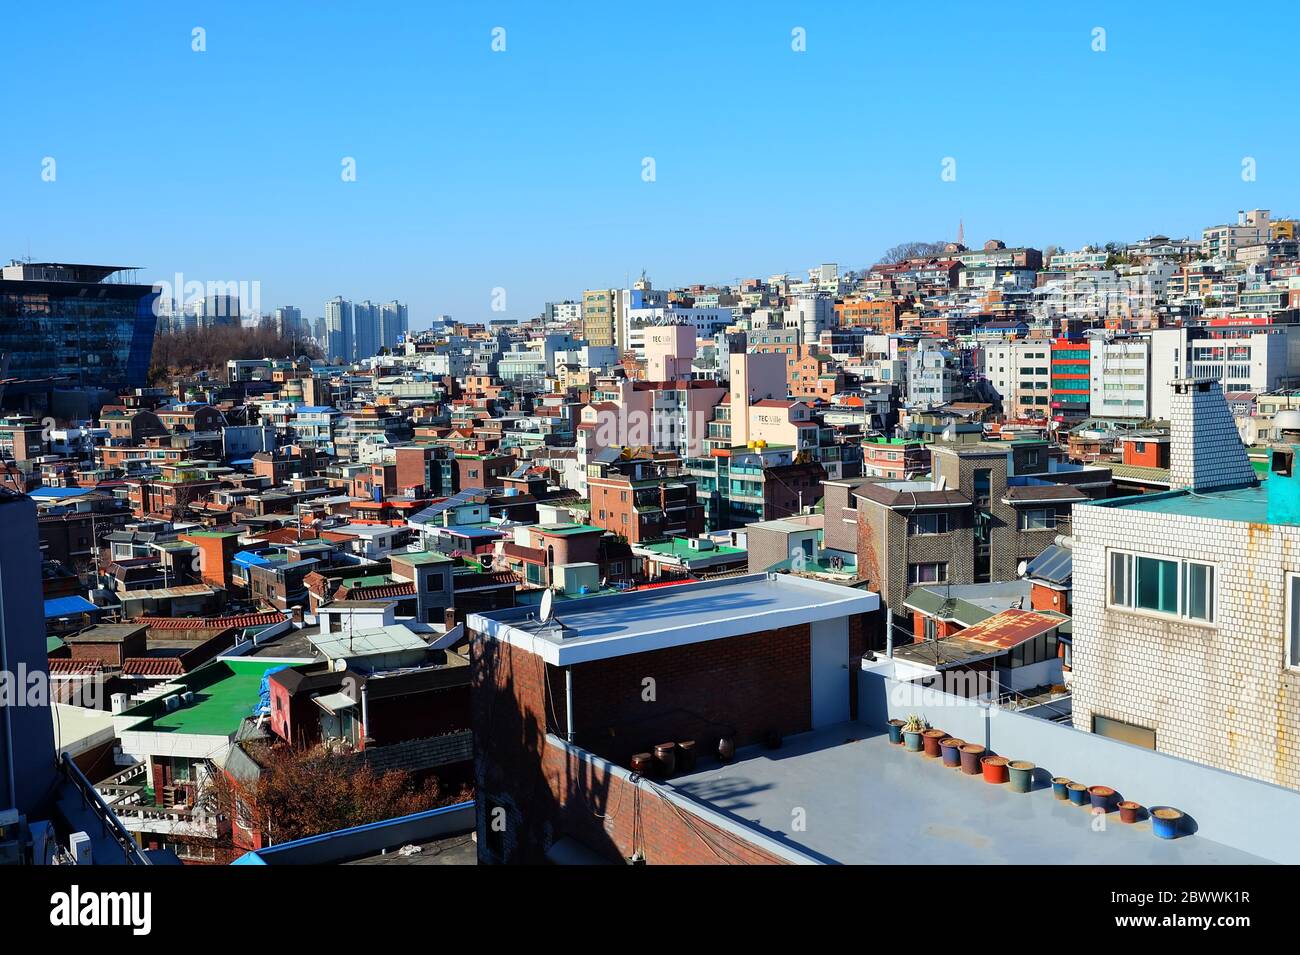 SEOUL, SOUTH KOREA - DECEMBER 29, 2018: Scenery of cityscape in the morning at Itaewon-dong area where is known for a famous dining and nightlife in S Stock Photo